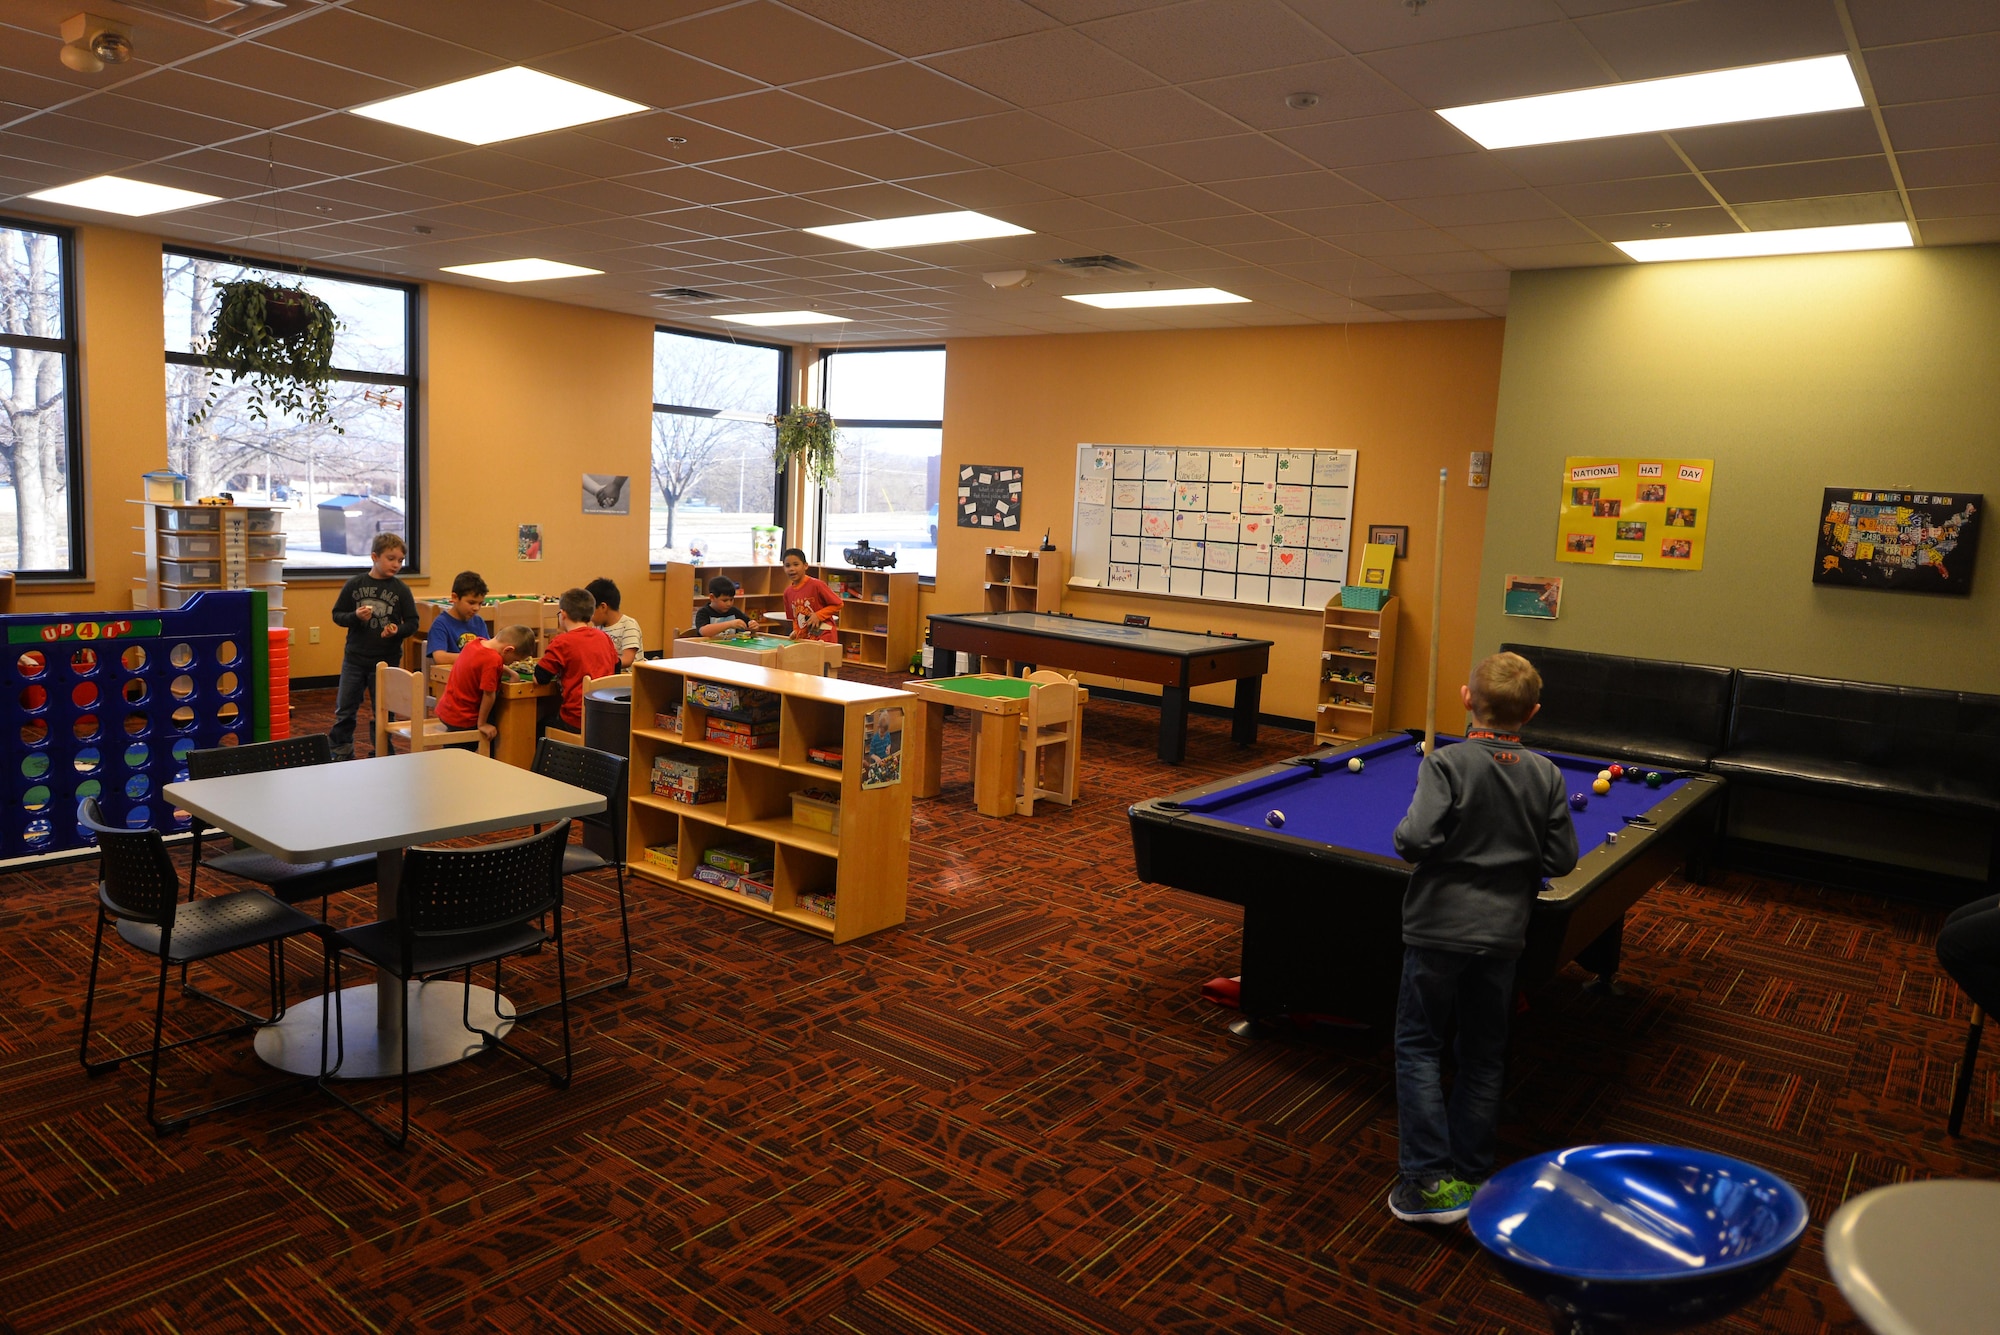 The new website, www.militarychildcare.com, was launched March 16 that will make finding childcare much easier and convenient than in the past. Offutt facilities include the Youth Center (above), the Child Development Center 1 and 2 and Family Child Care. (U.S. Air Force photo by Joshua Plueger)